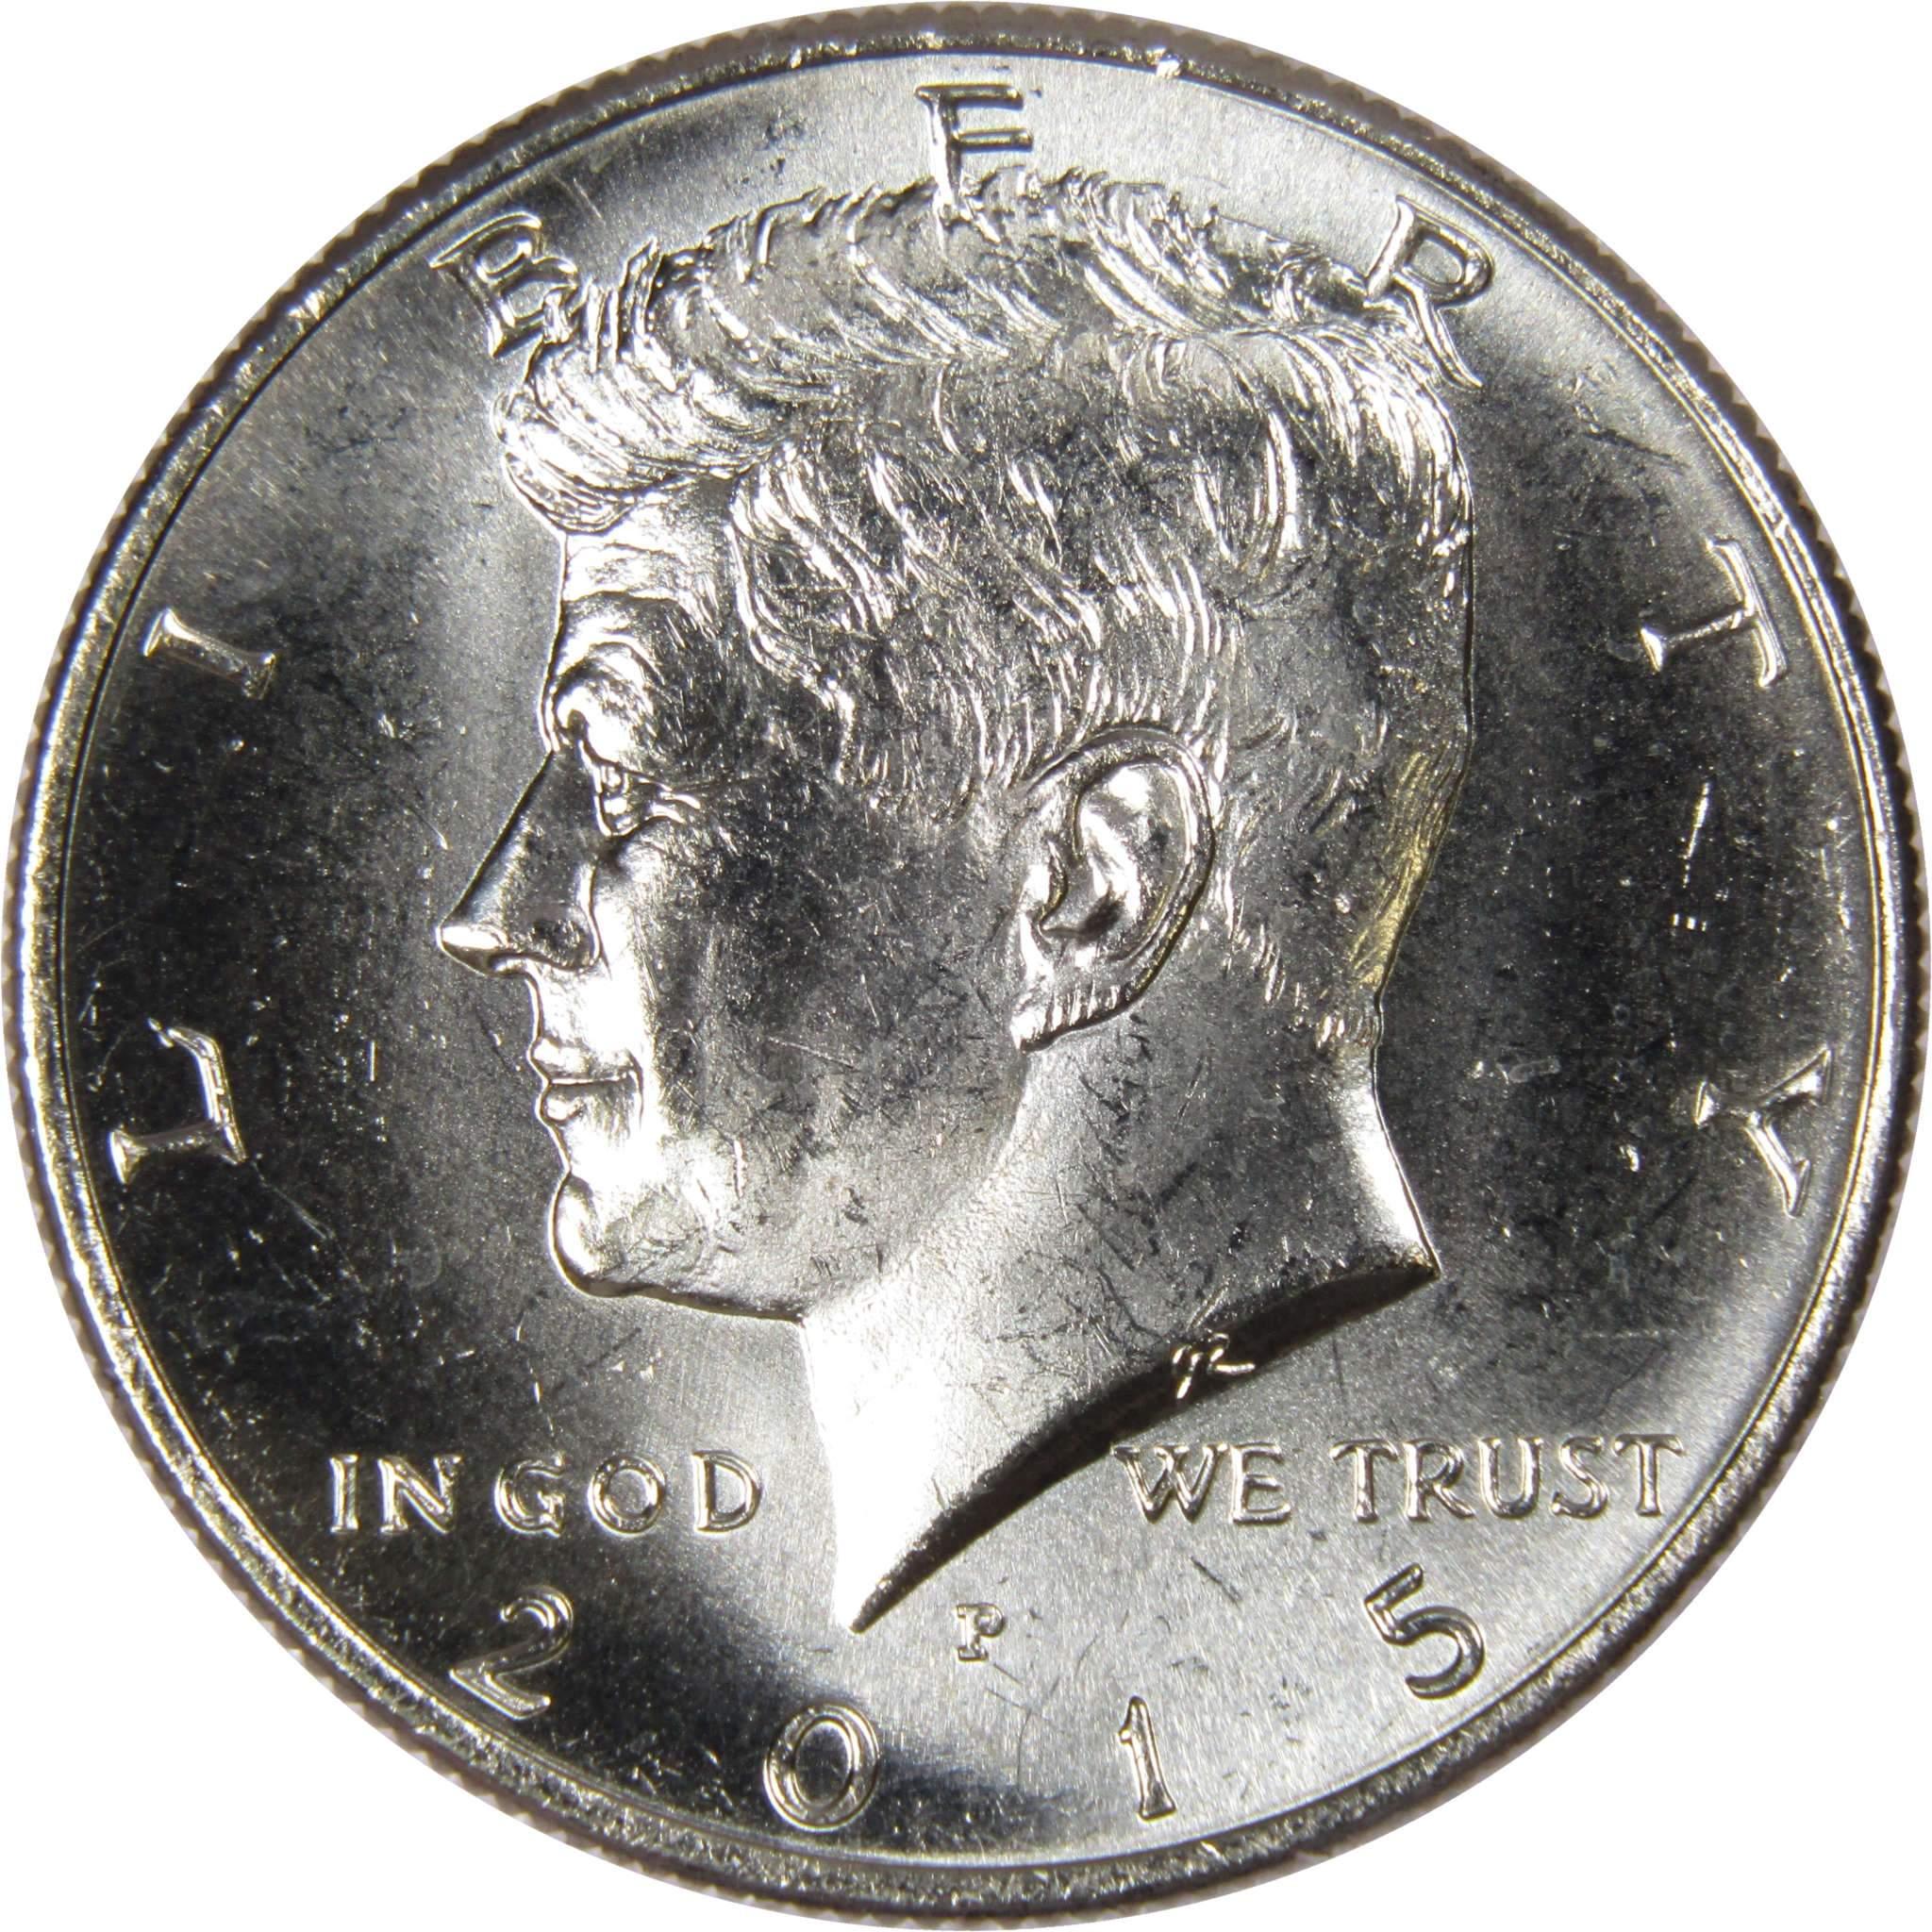 2015 P Kennedy Half Dollar BU Uncirculated Mint State 50c US Coin Collectible